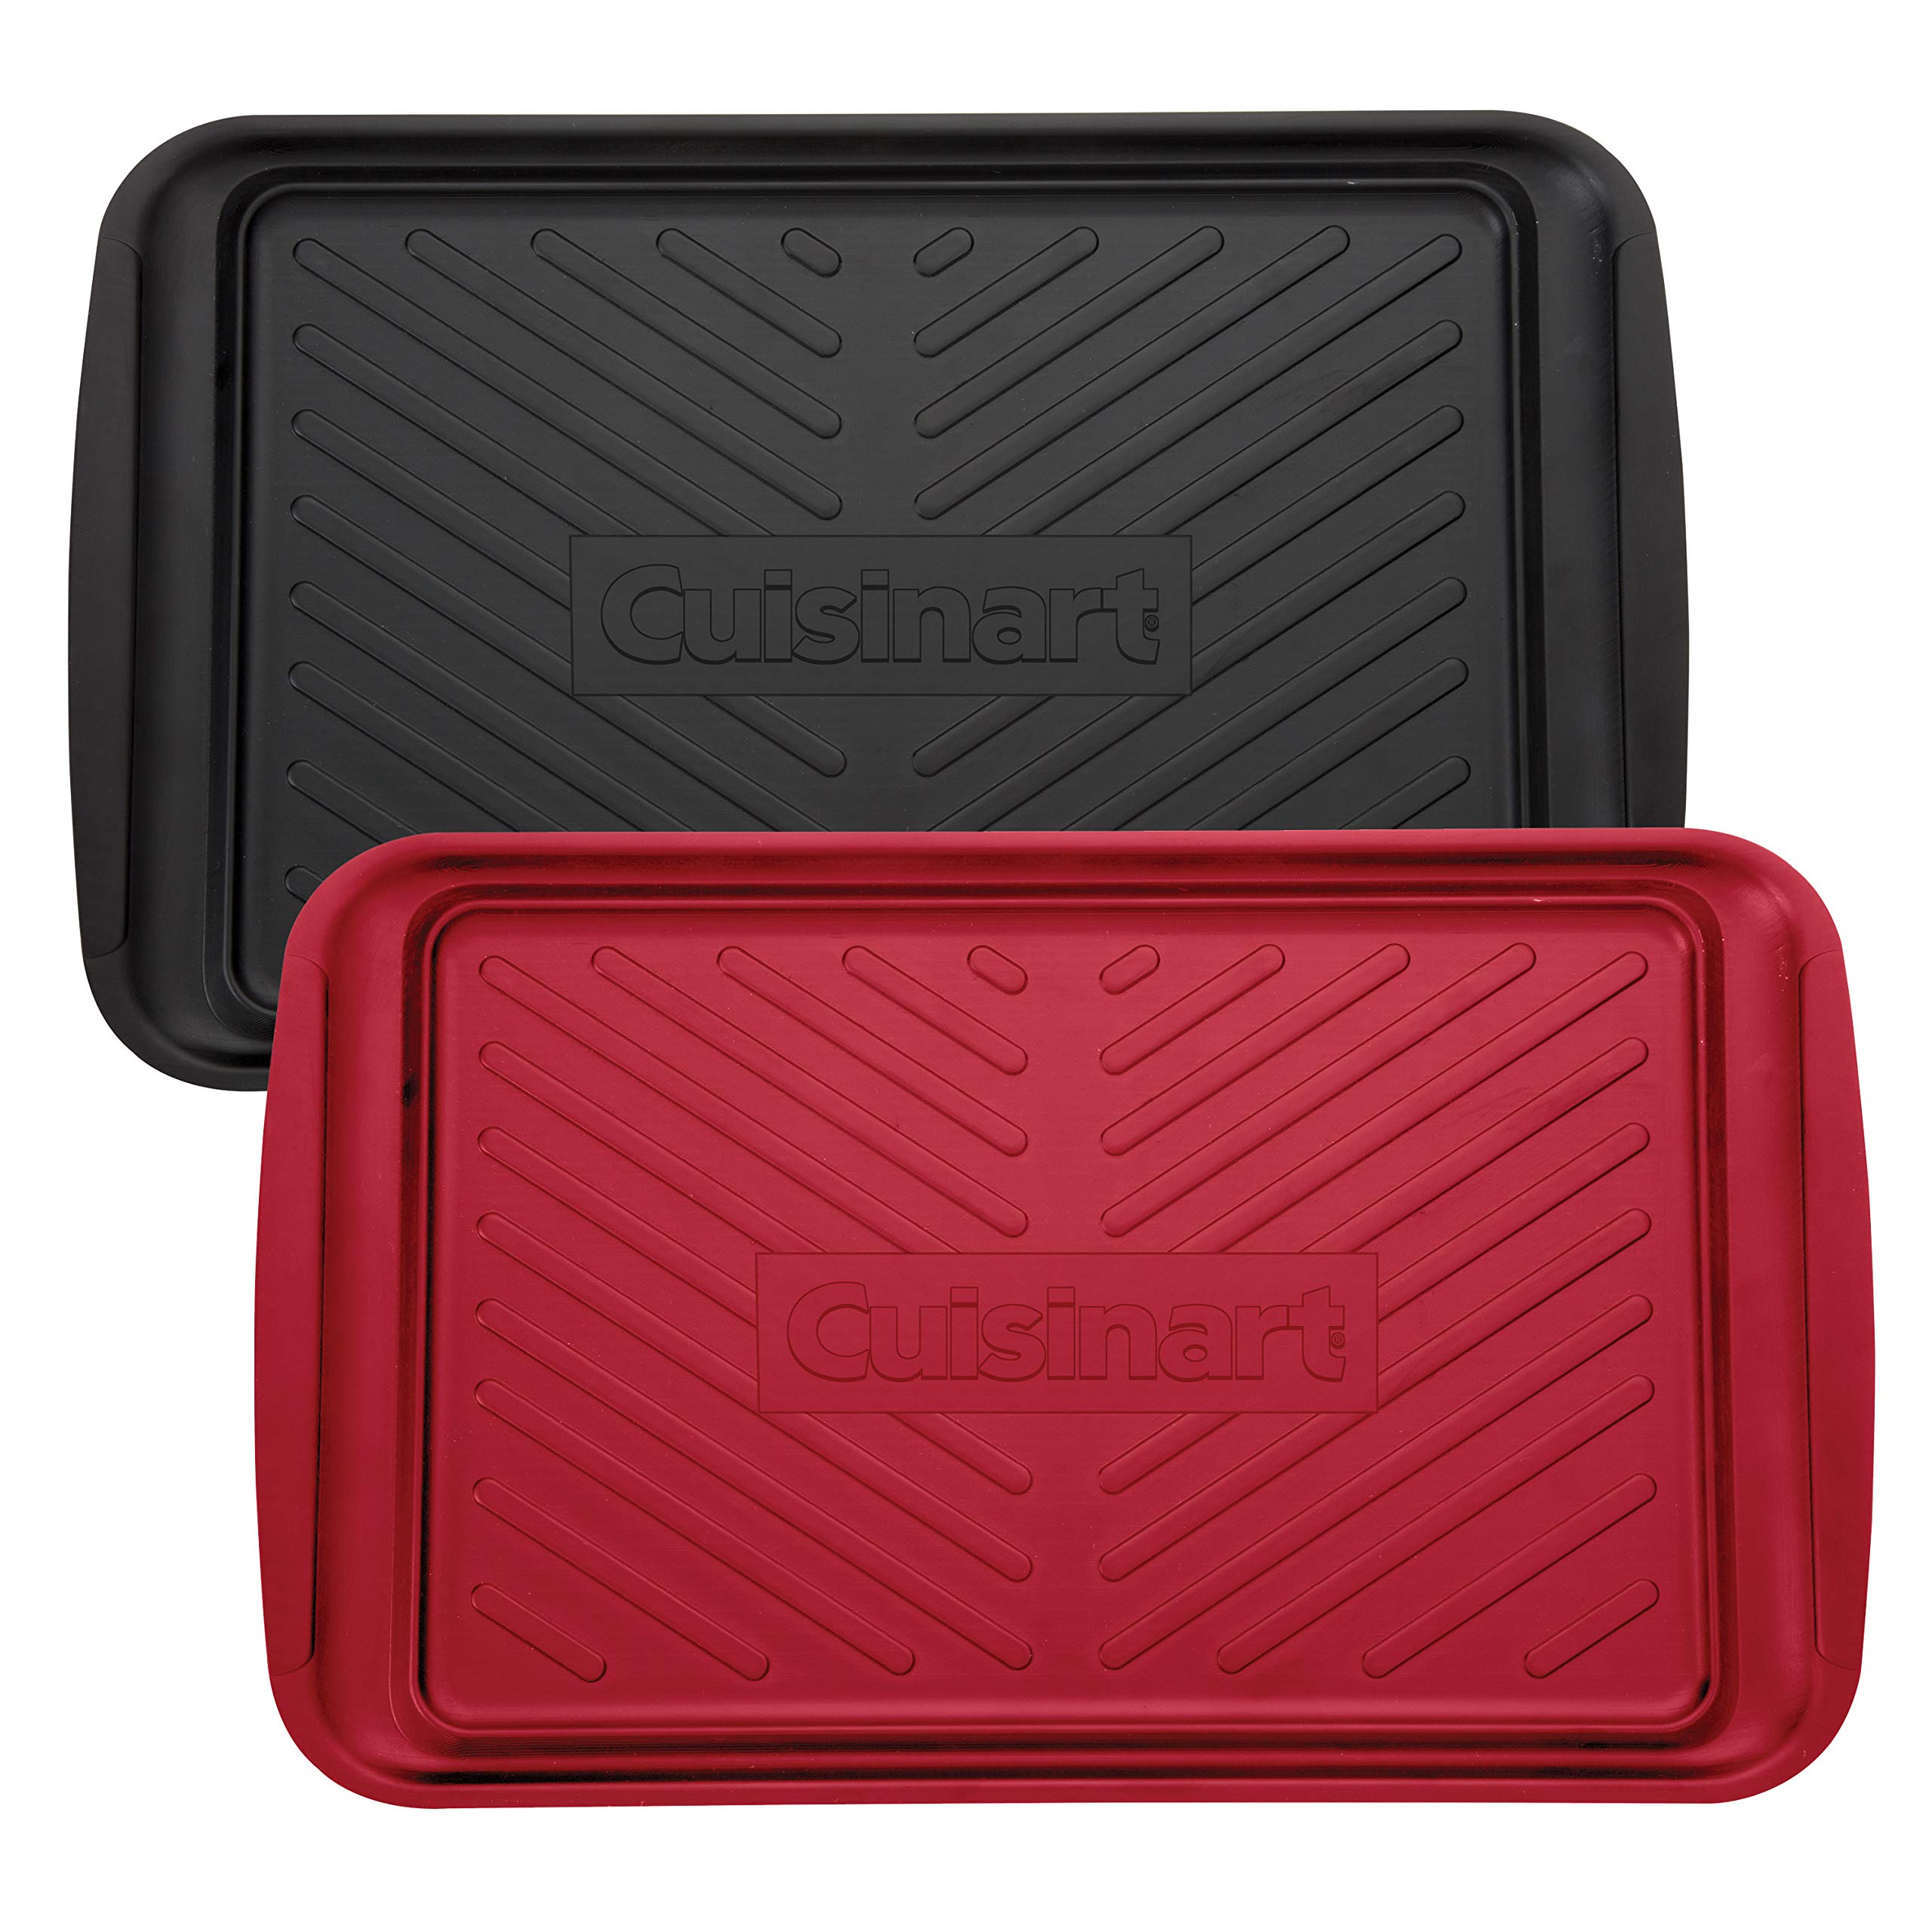 2-Count 17" x 10.5" Cuisinart Grilling Prep & Serve Trays (Black & Red, CPK-200) $13 + Free Shipping w/ Prime or on $35+